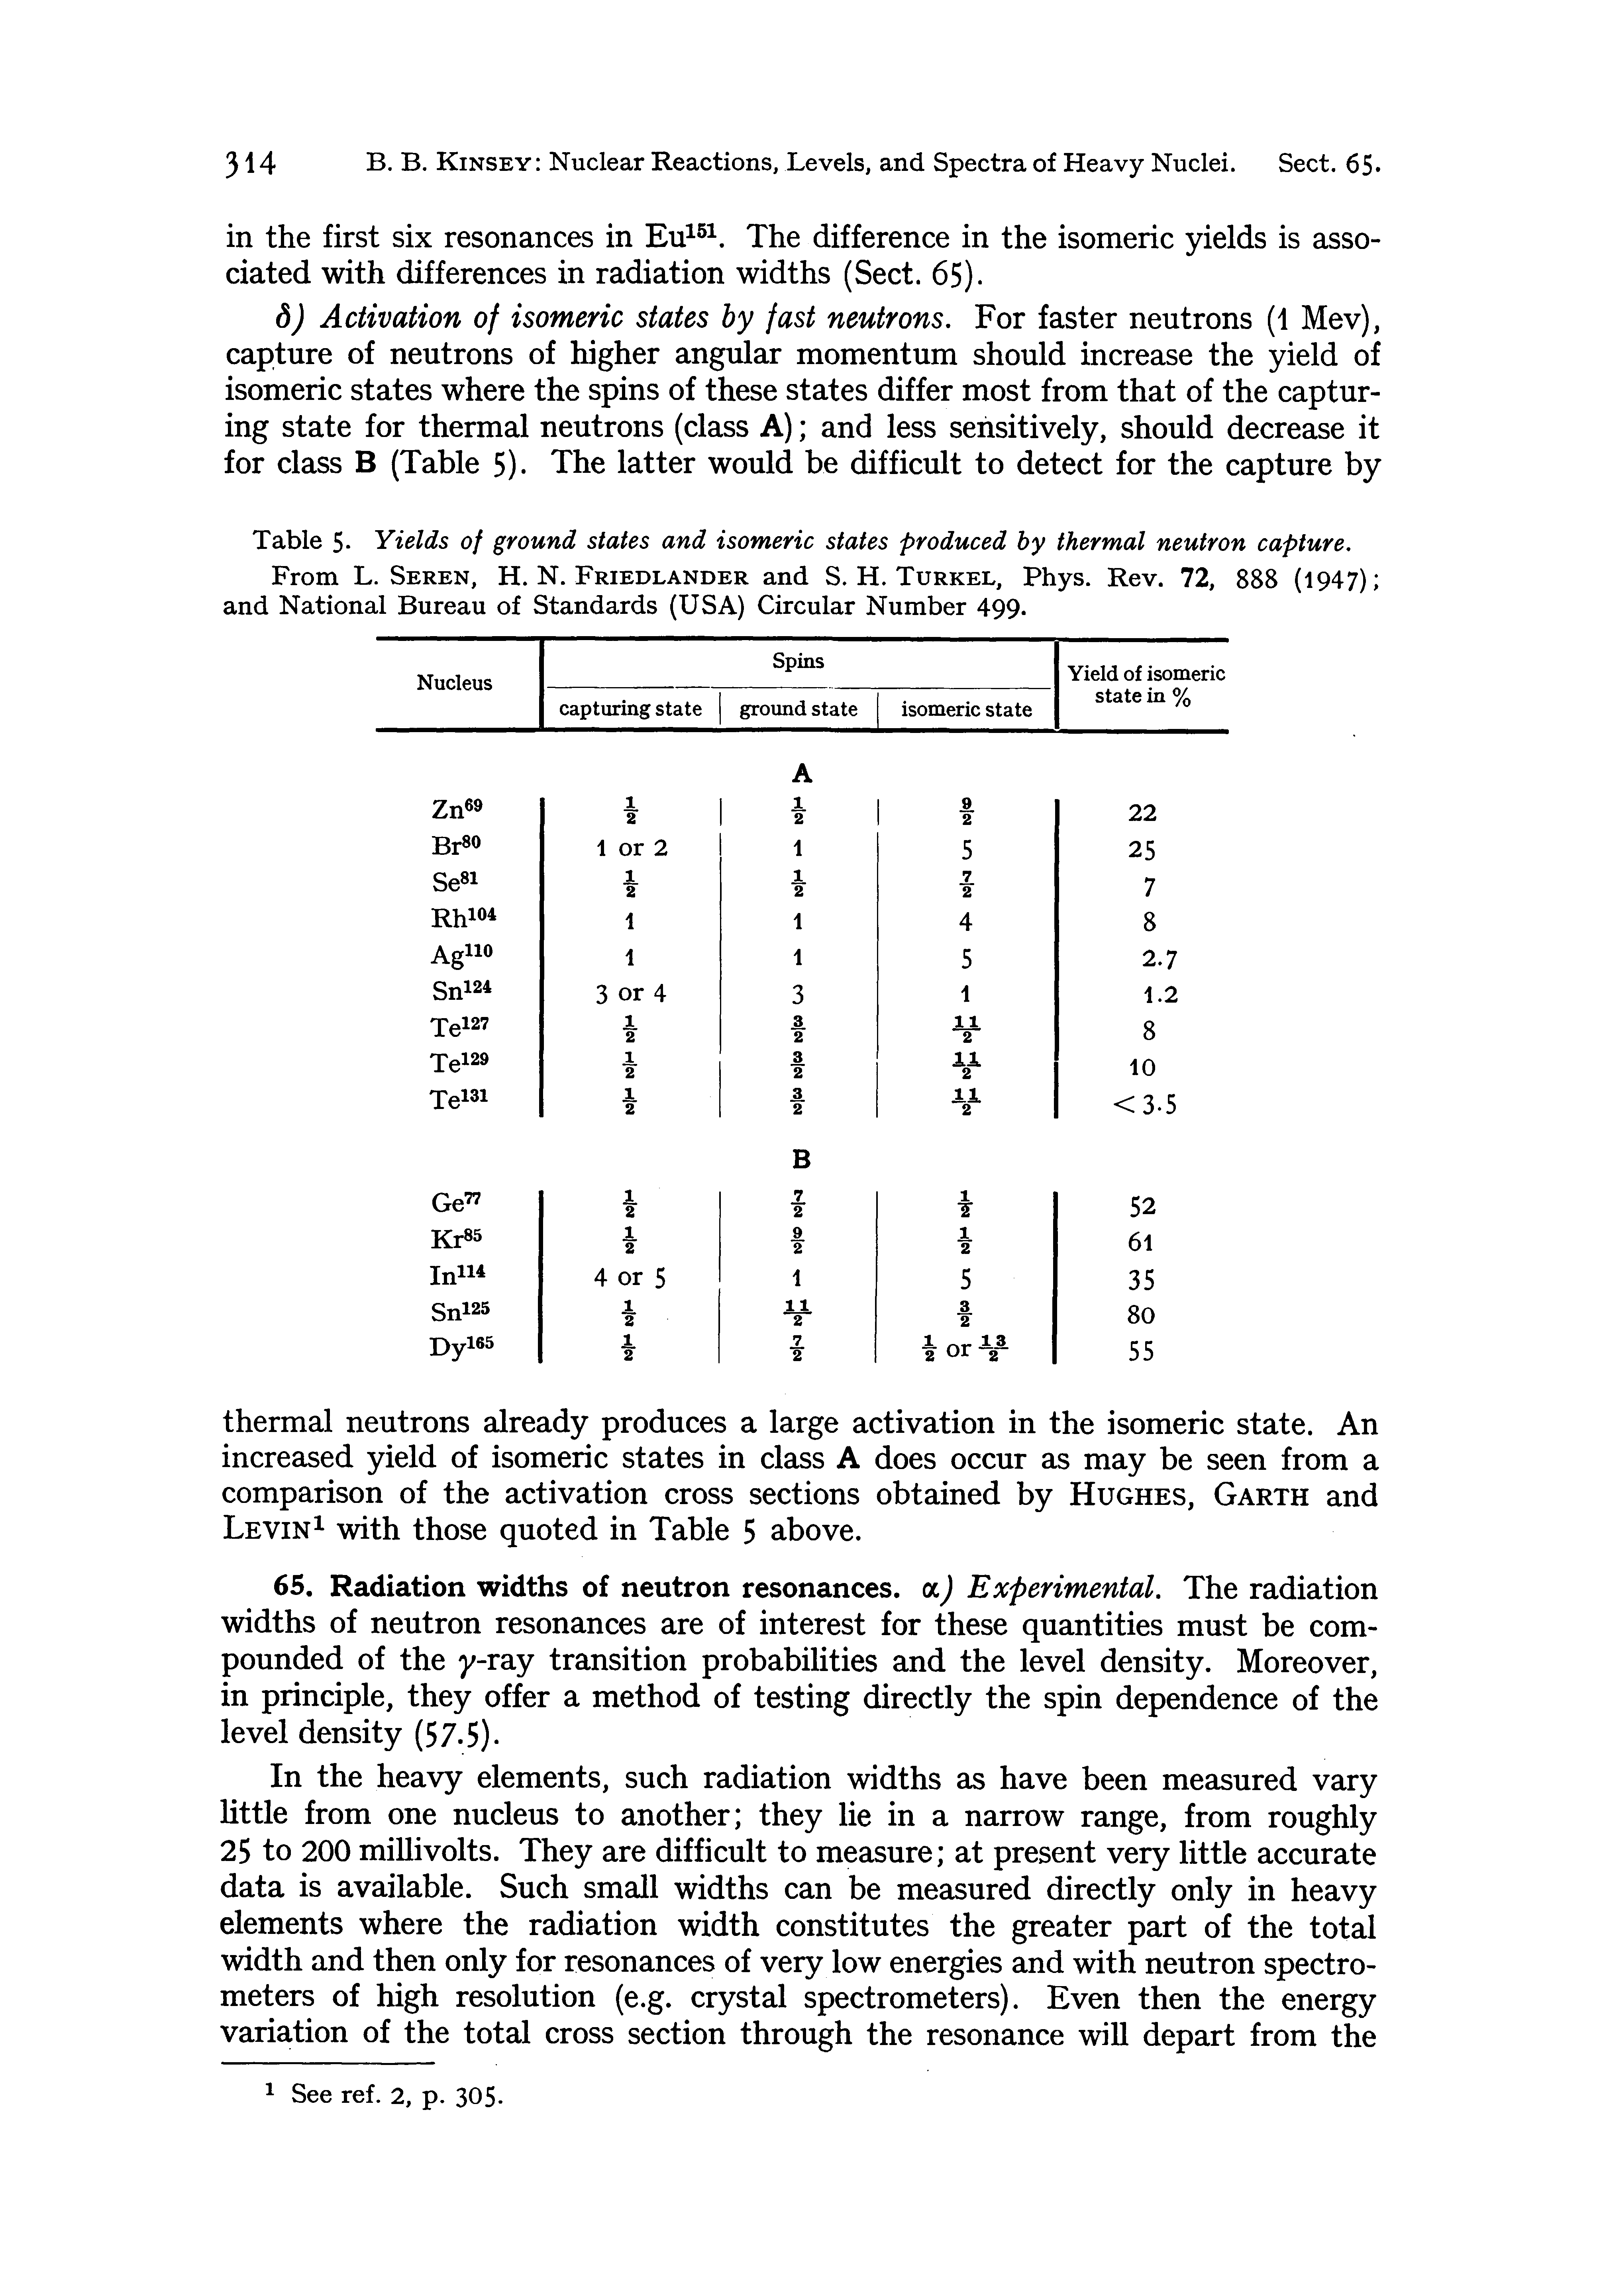 Table 5- Yields of ground states and isomeric states produced by thermal neutron capture. From L. Seren, H. N. Friedlander and S. H. Turkel, Phys. Rev. 72, 888 (1947) and National Bureau of Standards (USA) Circular Number 499-...